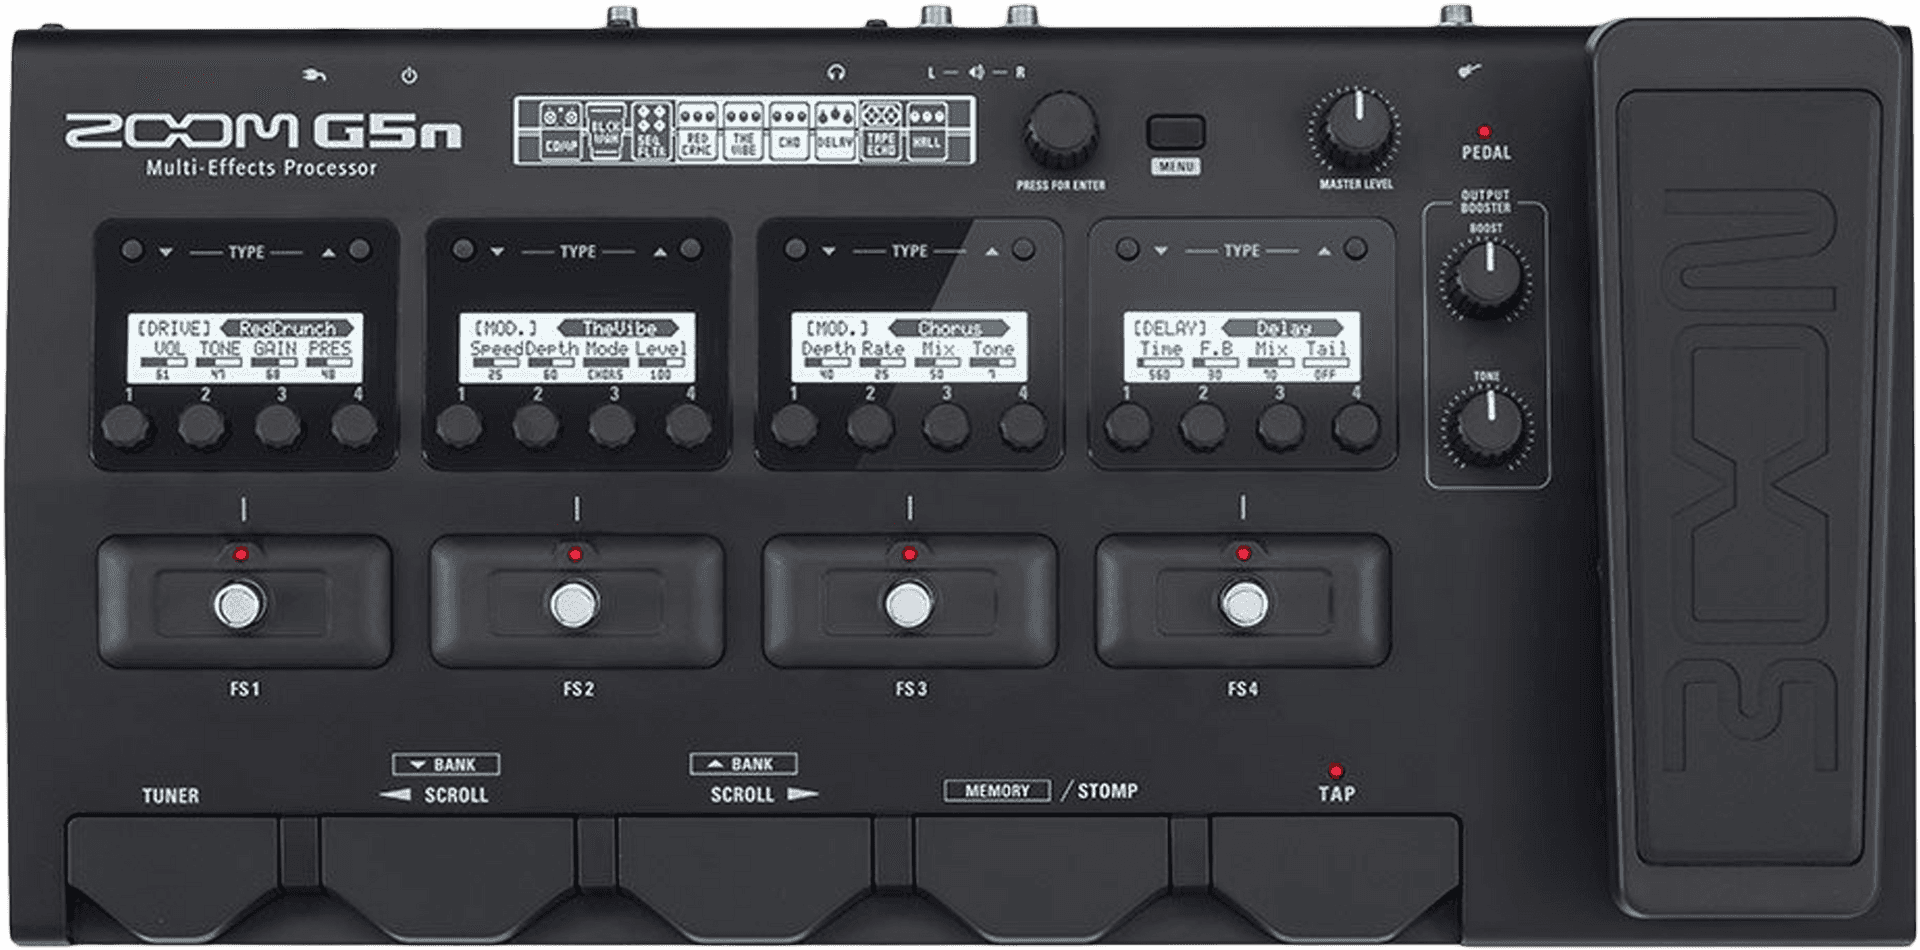 Zoom G5n Multi Effects Processor PNG